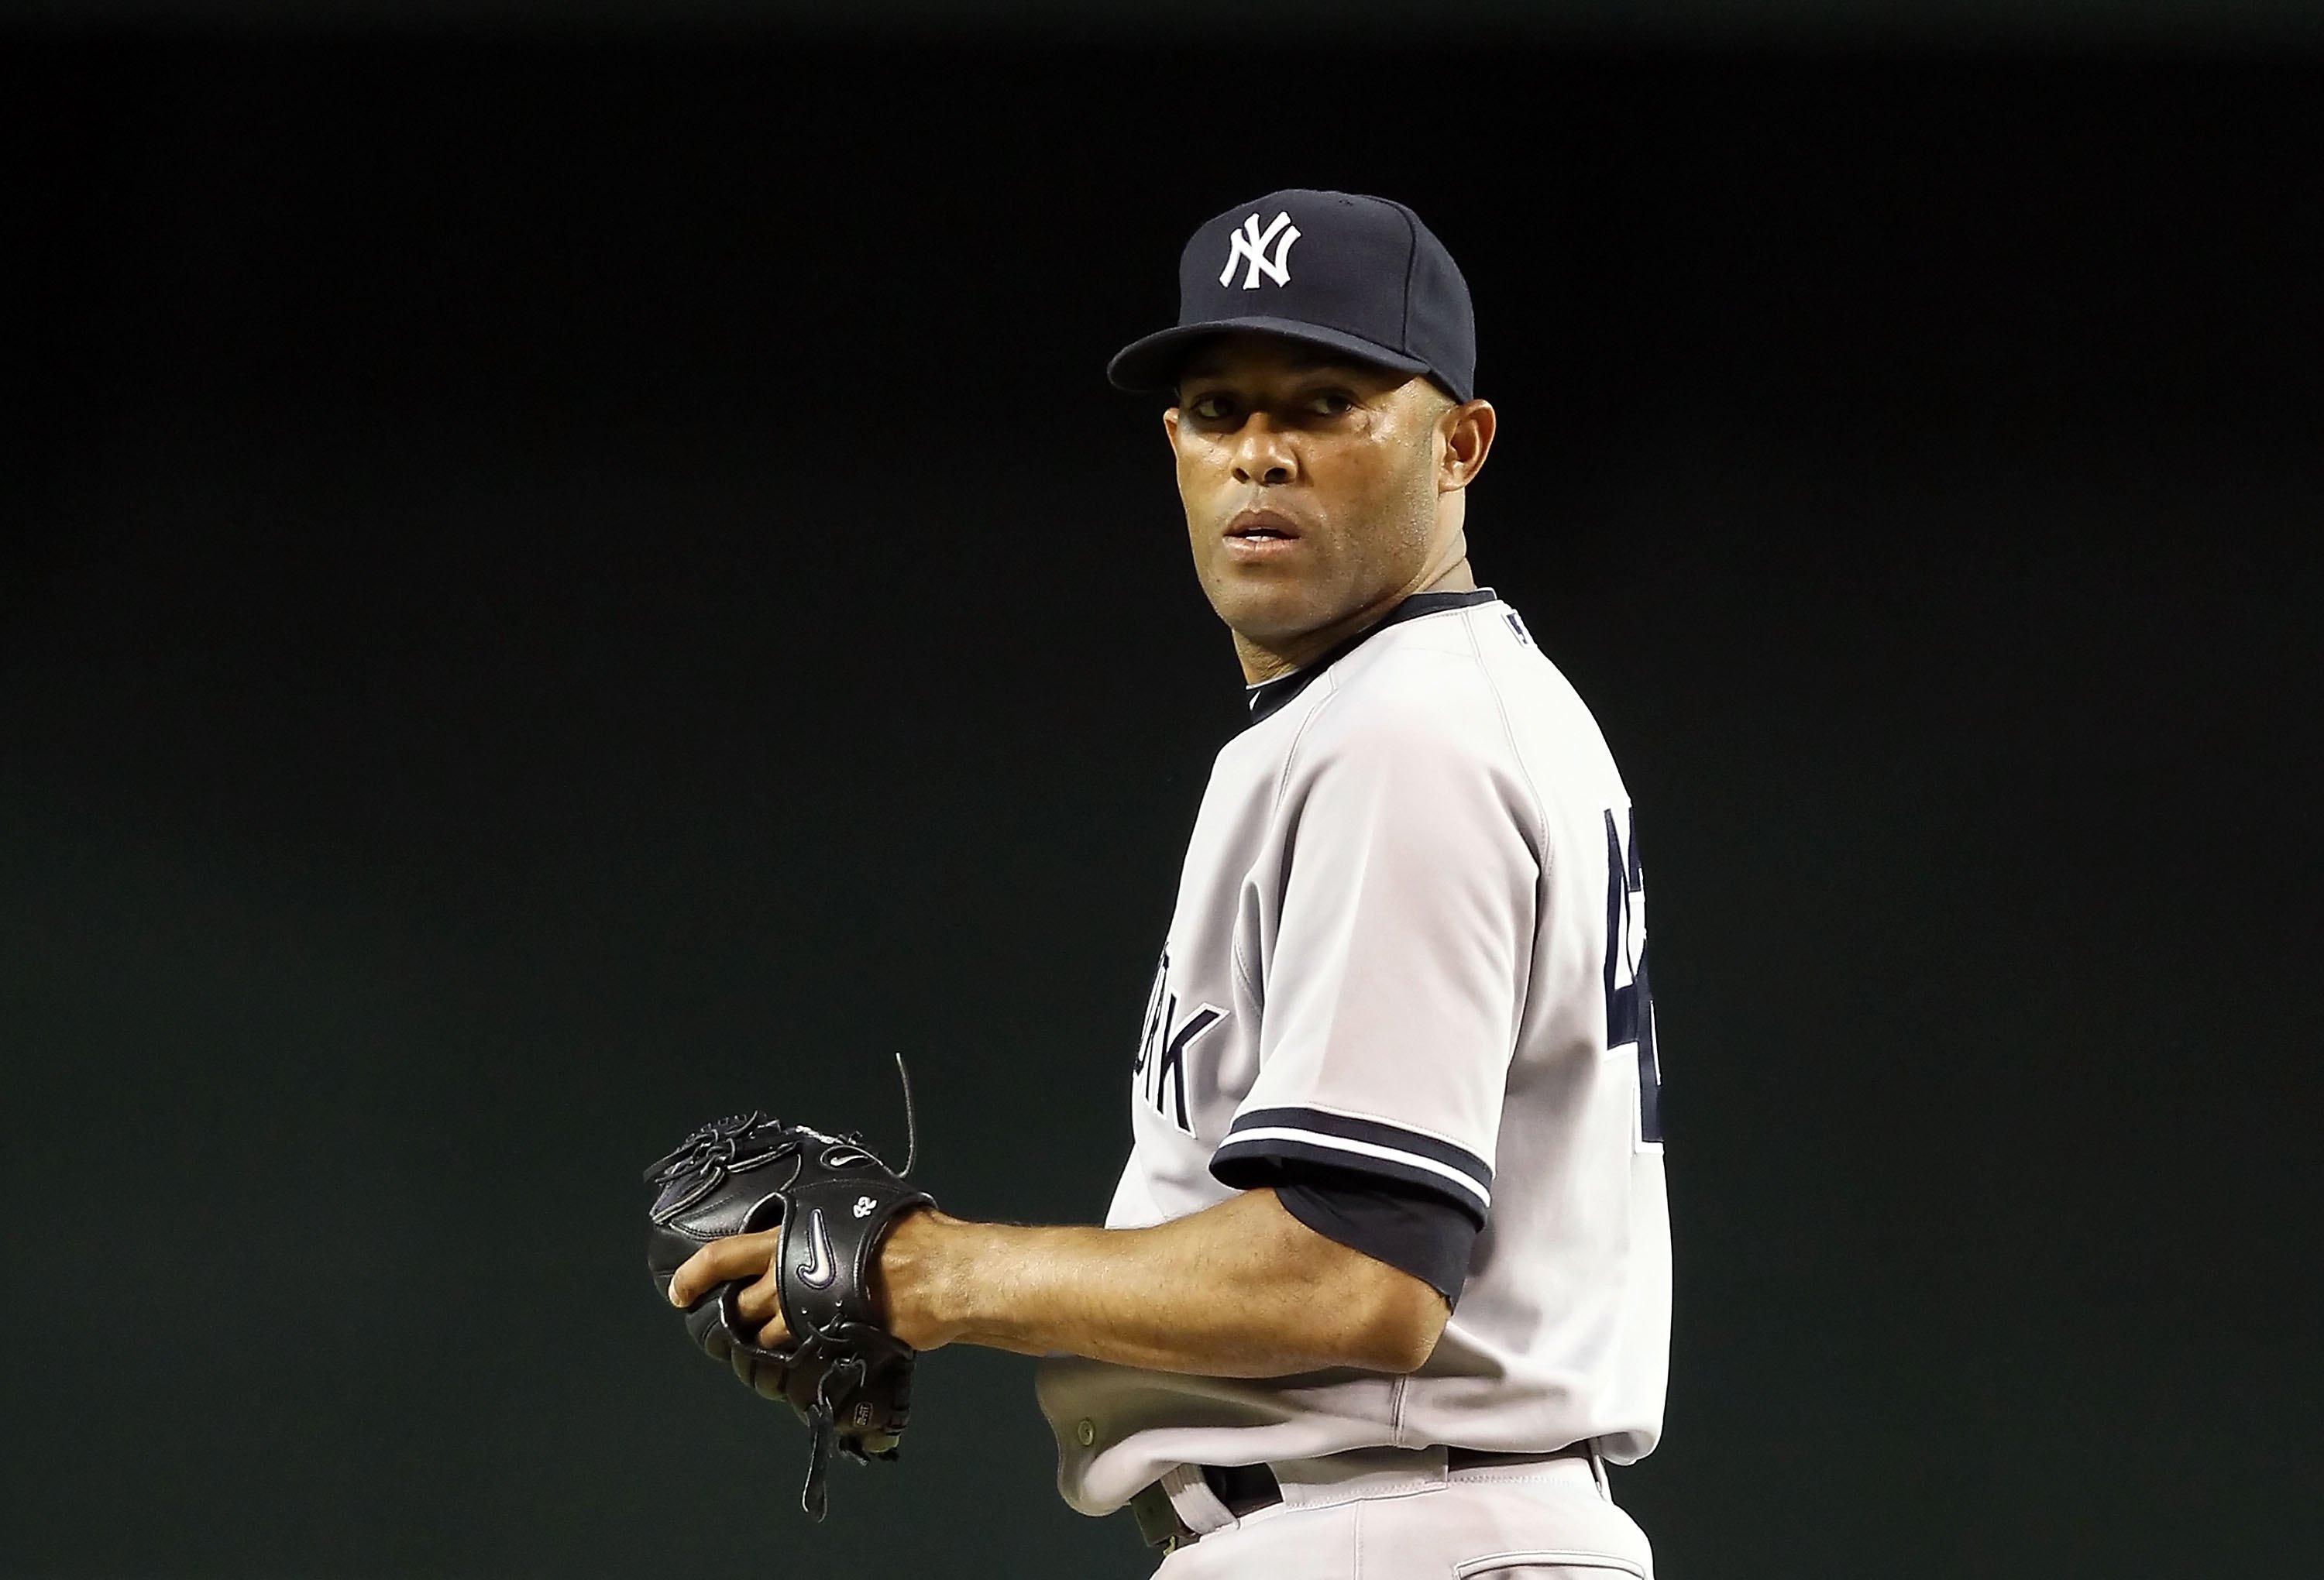 MLB Power Rankings: Mariano Rivera and the Most Clutch Players on